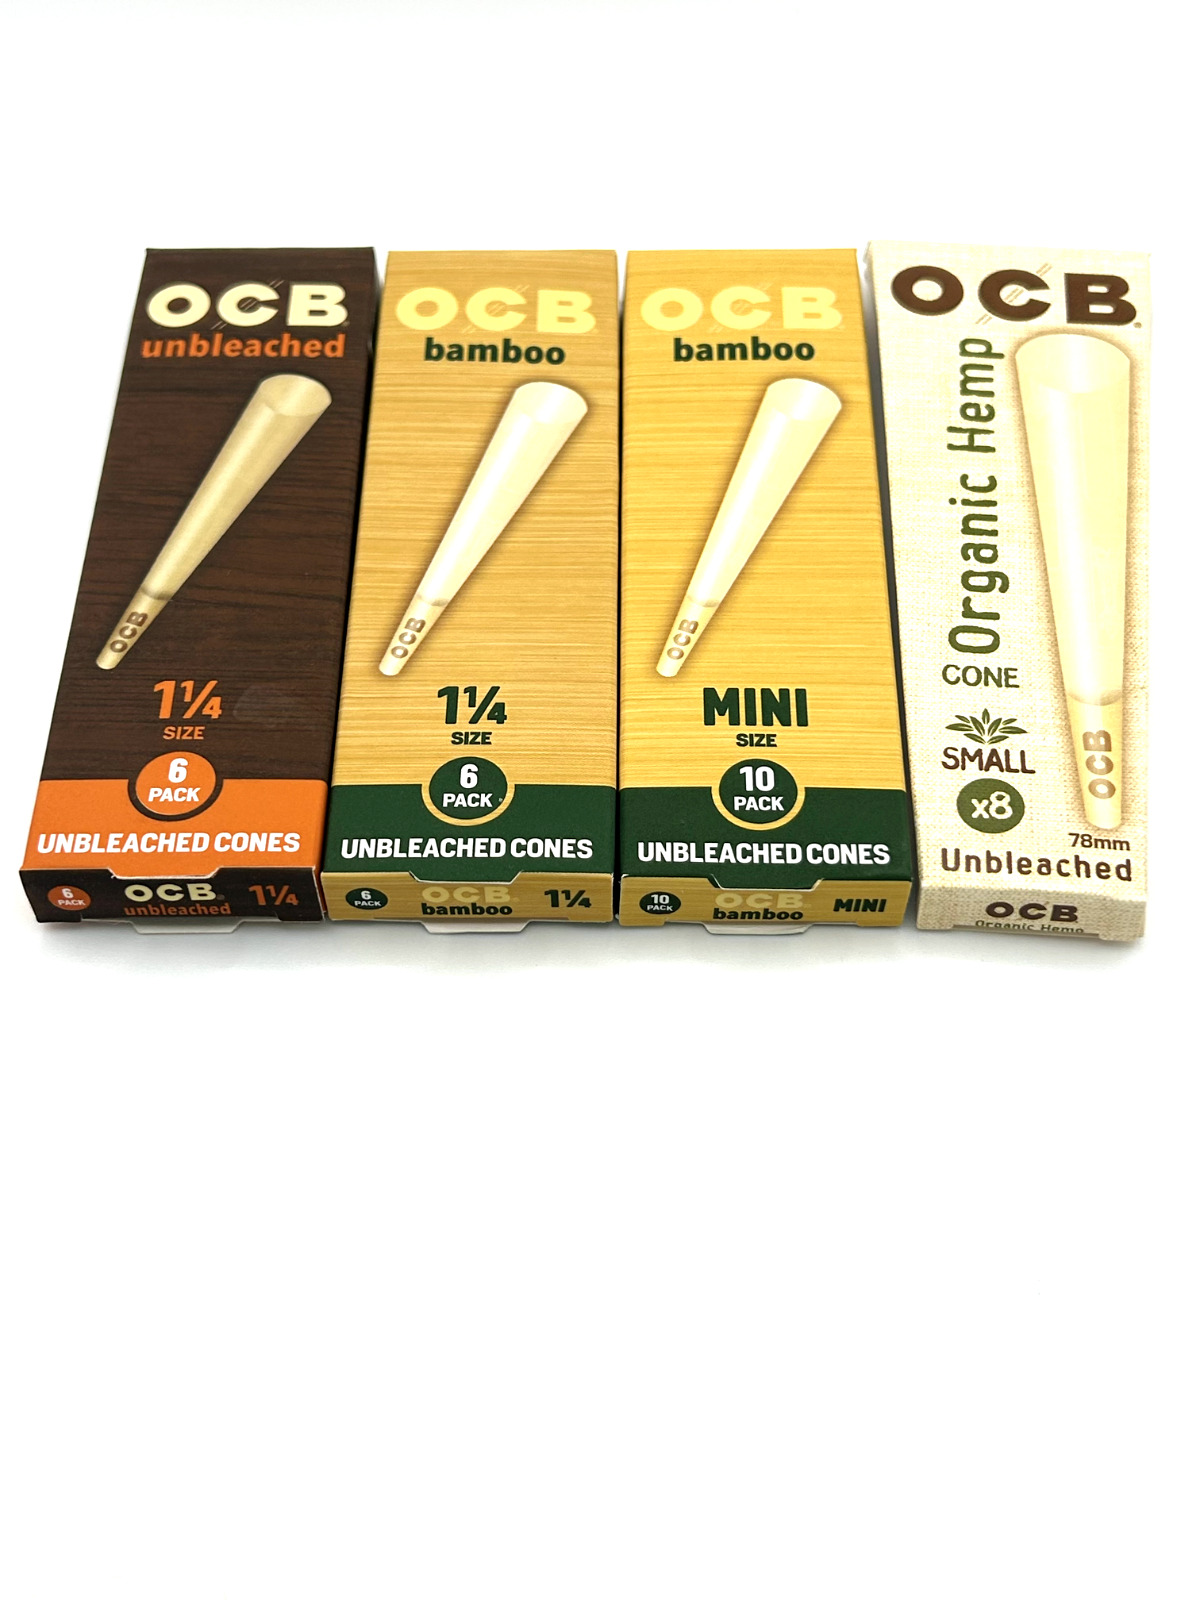 OCB Unbleached Pre-rolled Cones (1 1/4, Mini, Small Size) 4 MIX Packs.